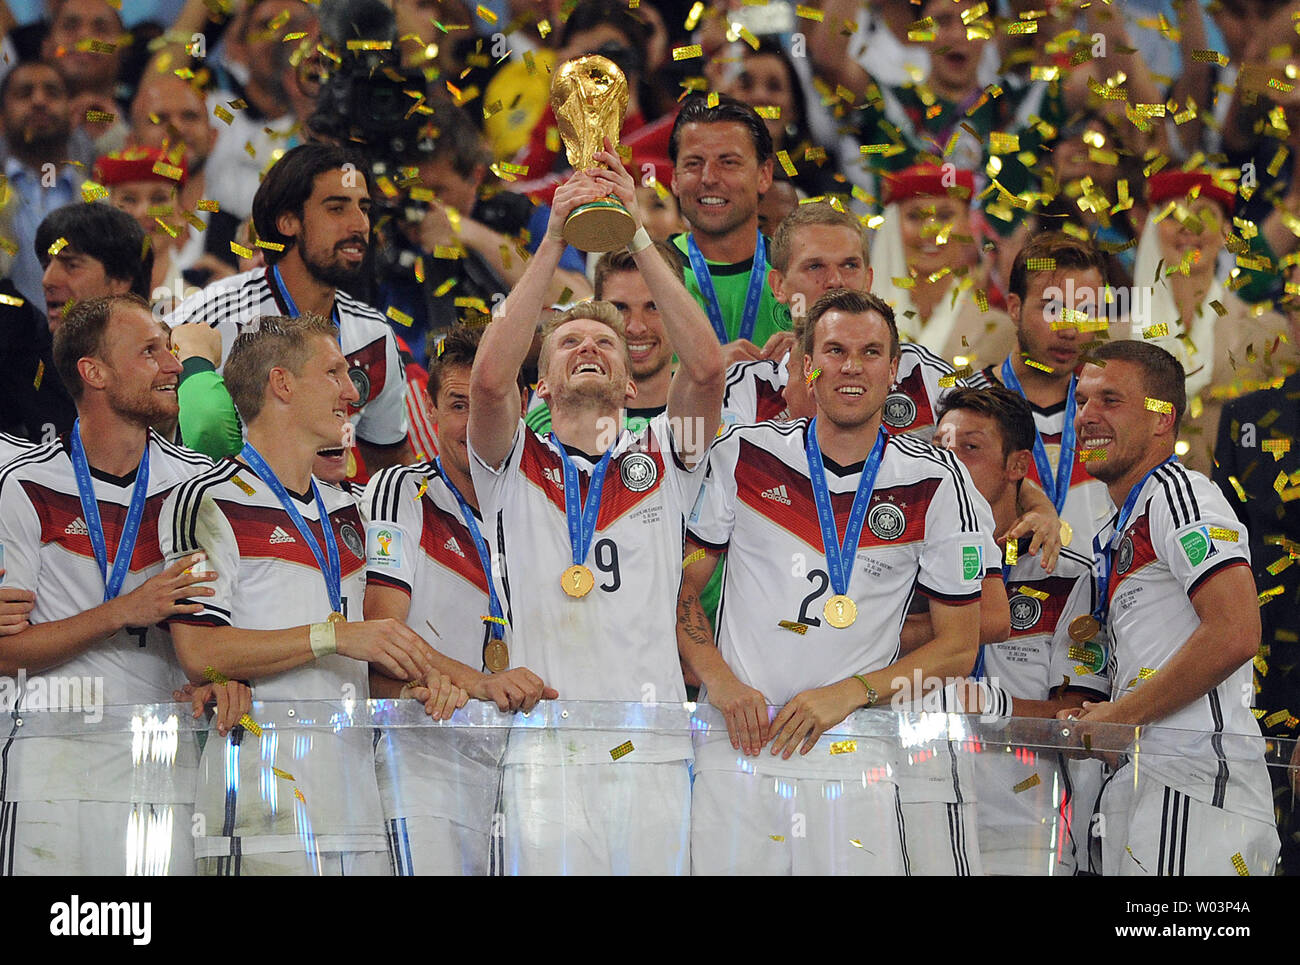 Andre Schurrle of Germany lifts the trophy following the 2014 FIFA World Cup Final at the Estadio do Maracana in Rio de Janeiro, Brazil on July 13, 2014. UPI/Chris Brunskill Stock Photo